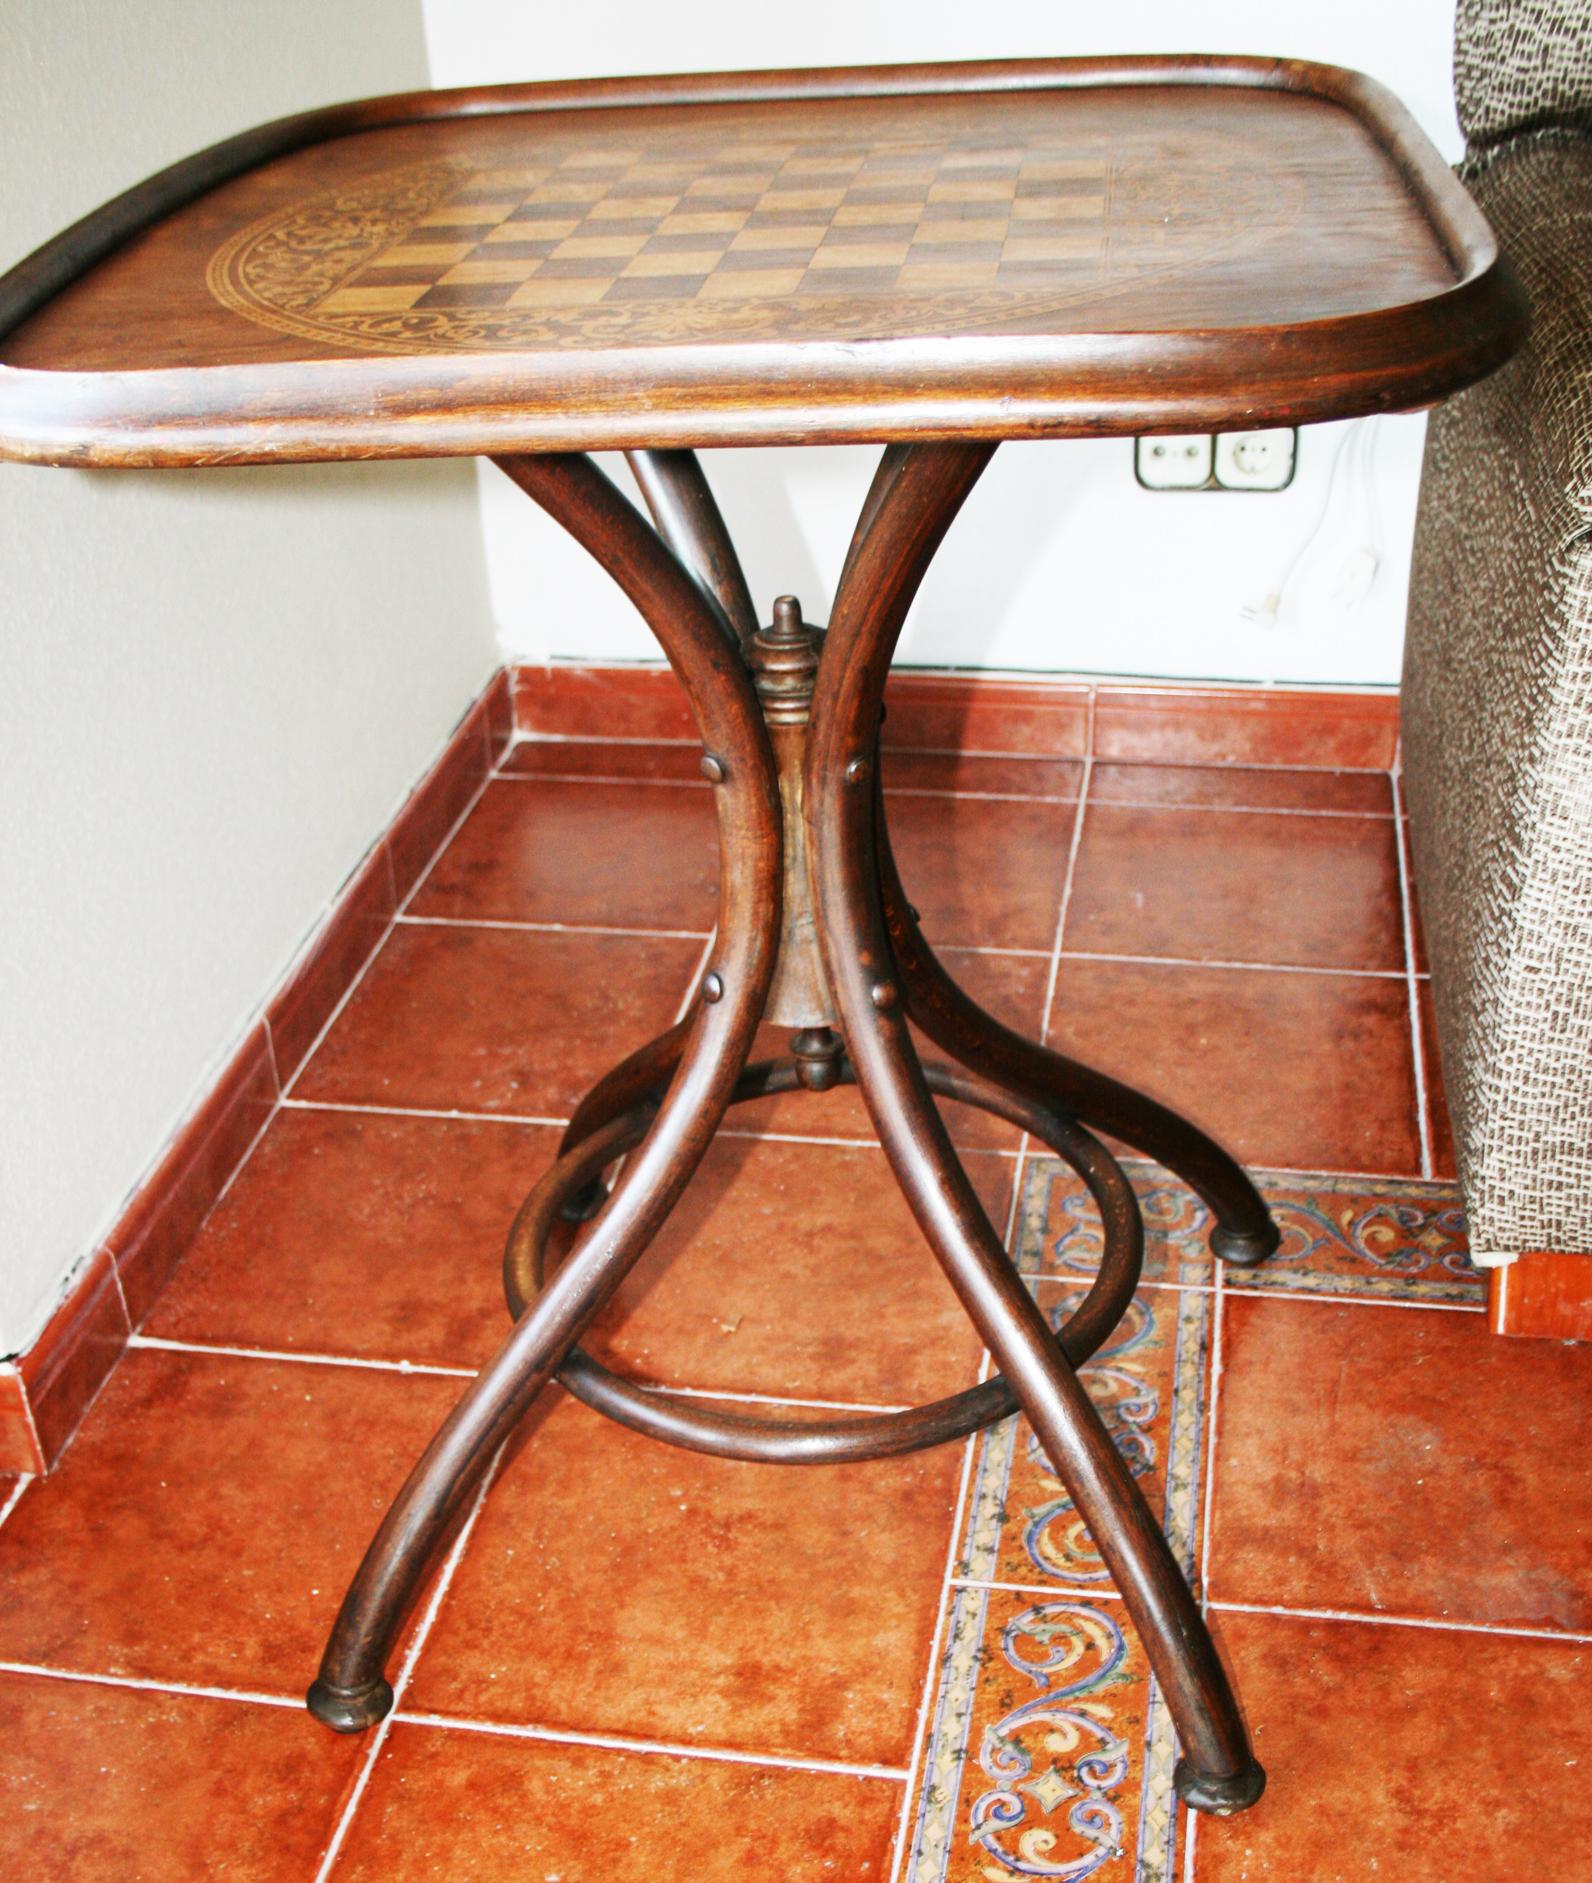 Spanish Thonet Style Bentwood Game Table, Late 19th Century or Early 20th Century